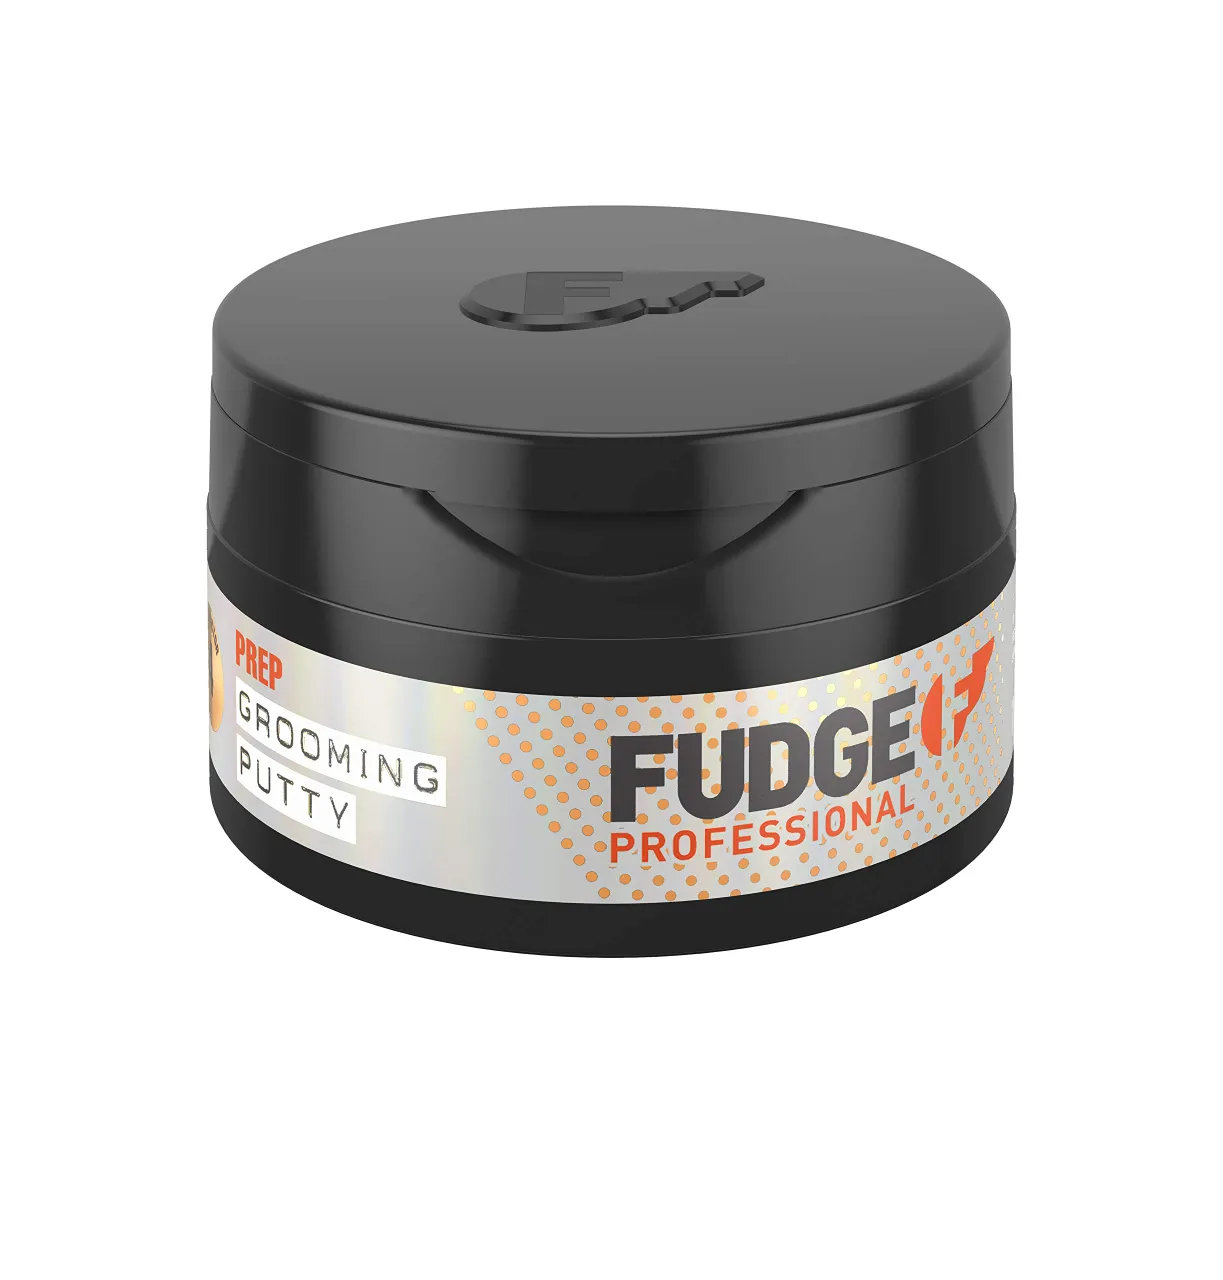 Fudge Professional Grooming Putty